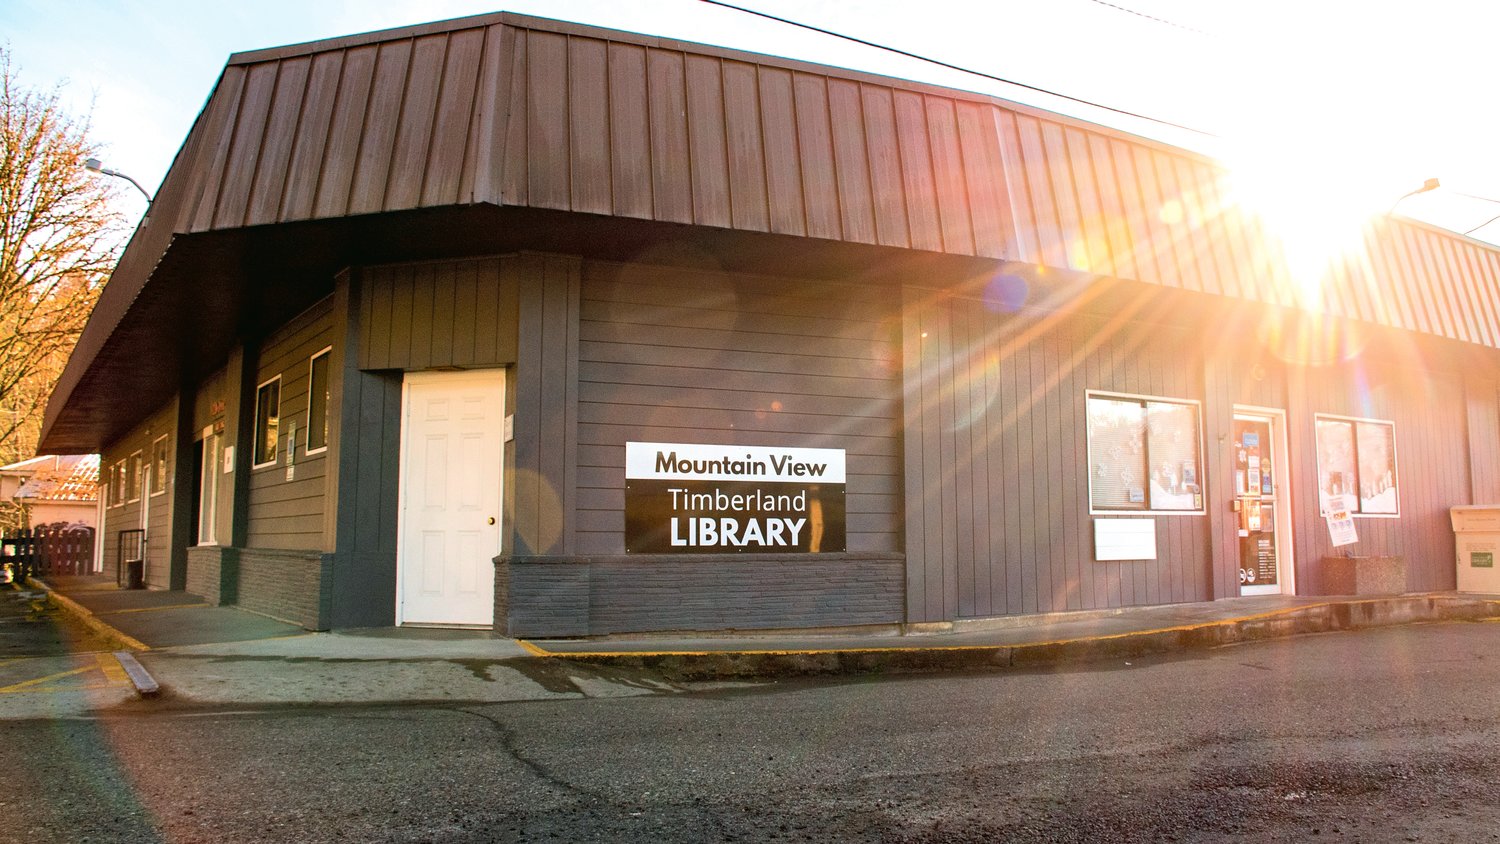 The Mountain View Timberland Library is located at 210 Silverbrook Road in Randle